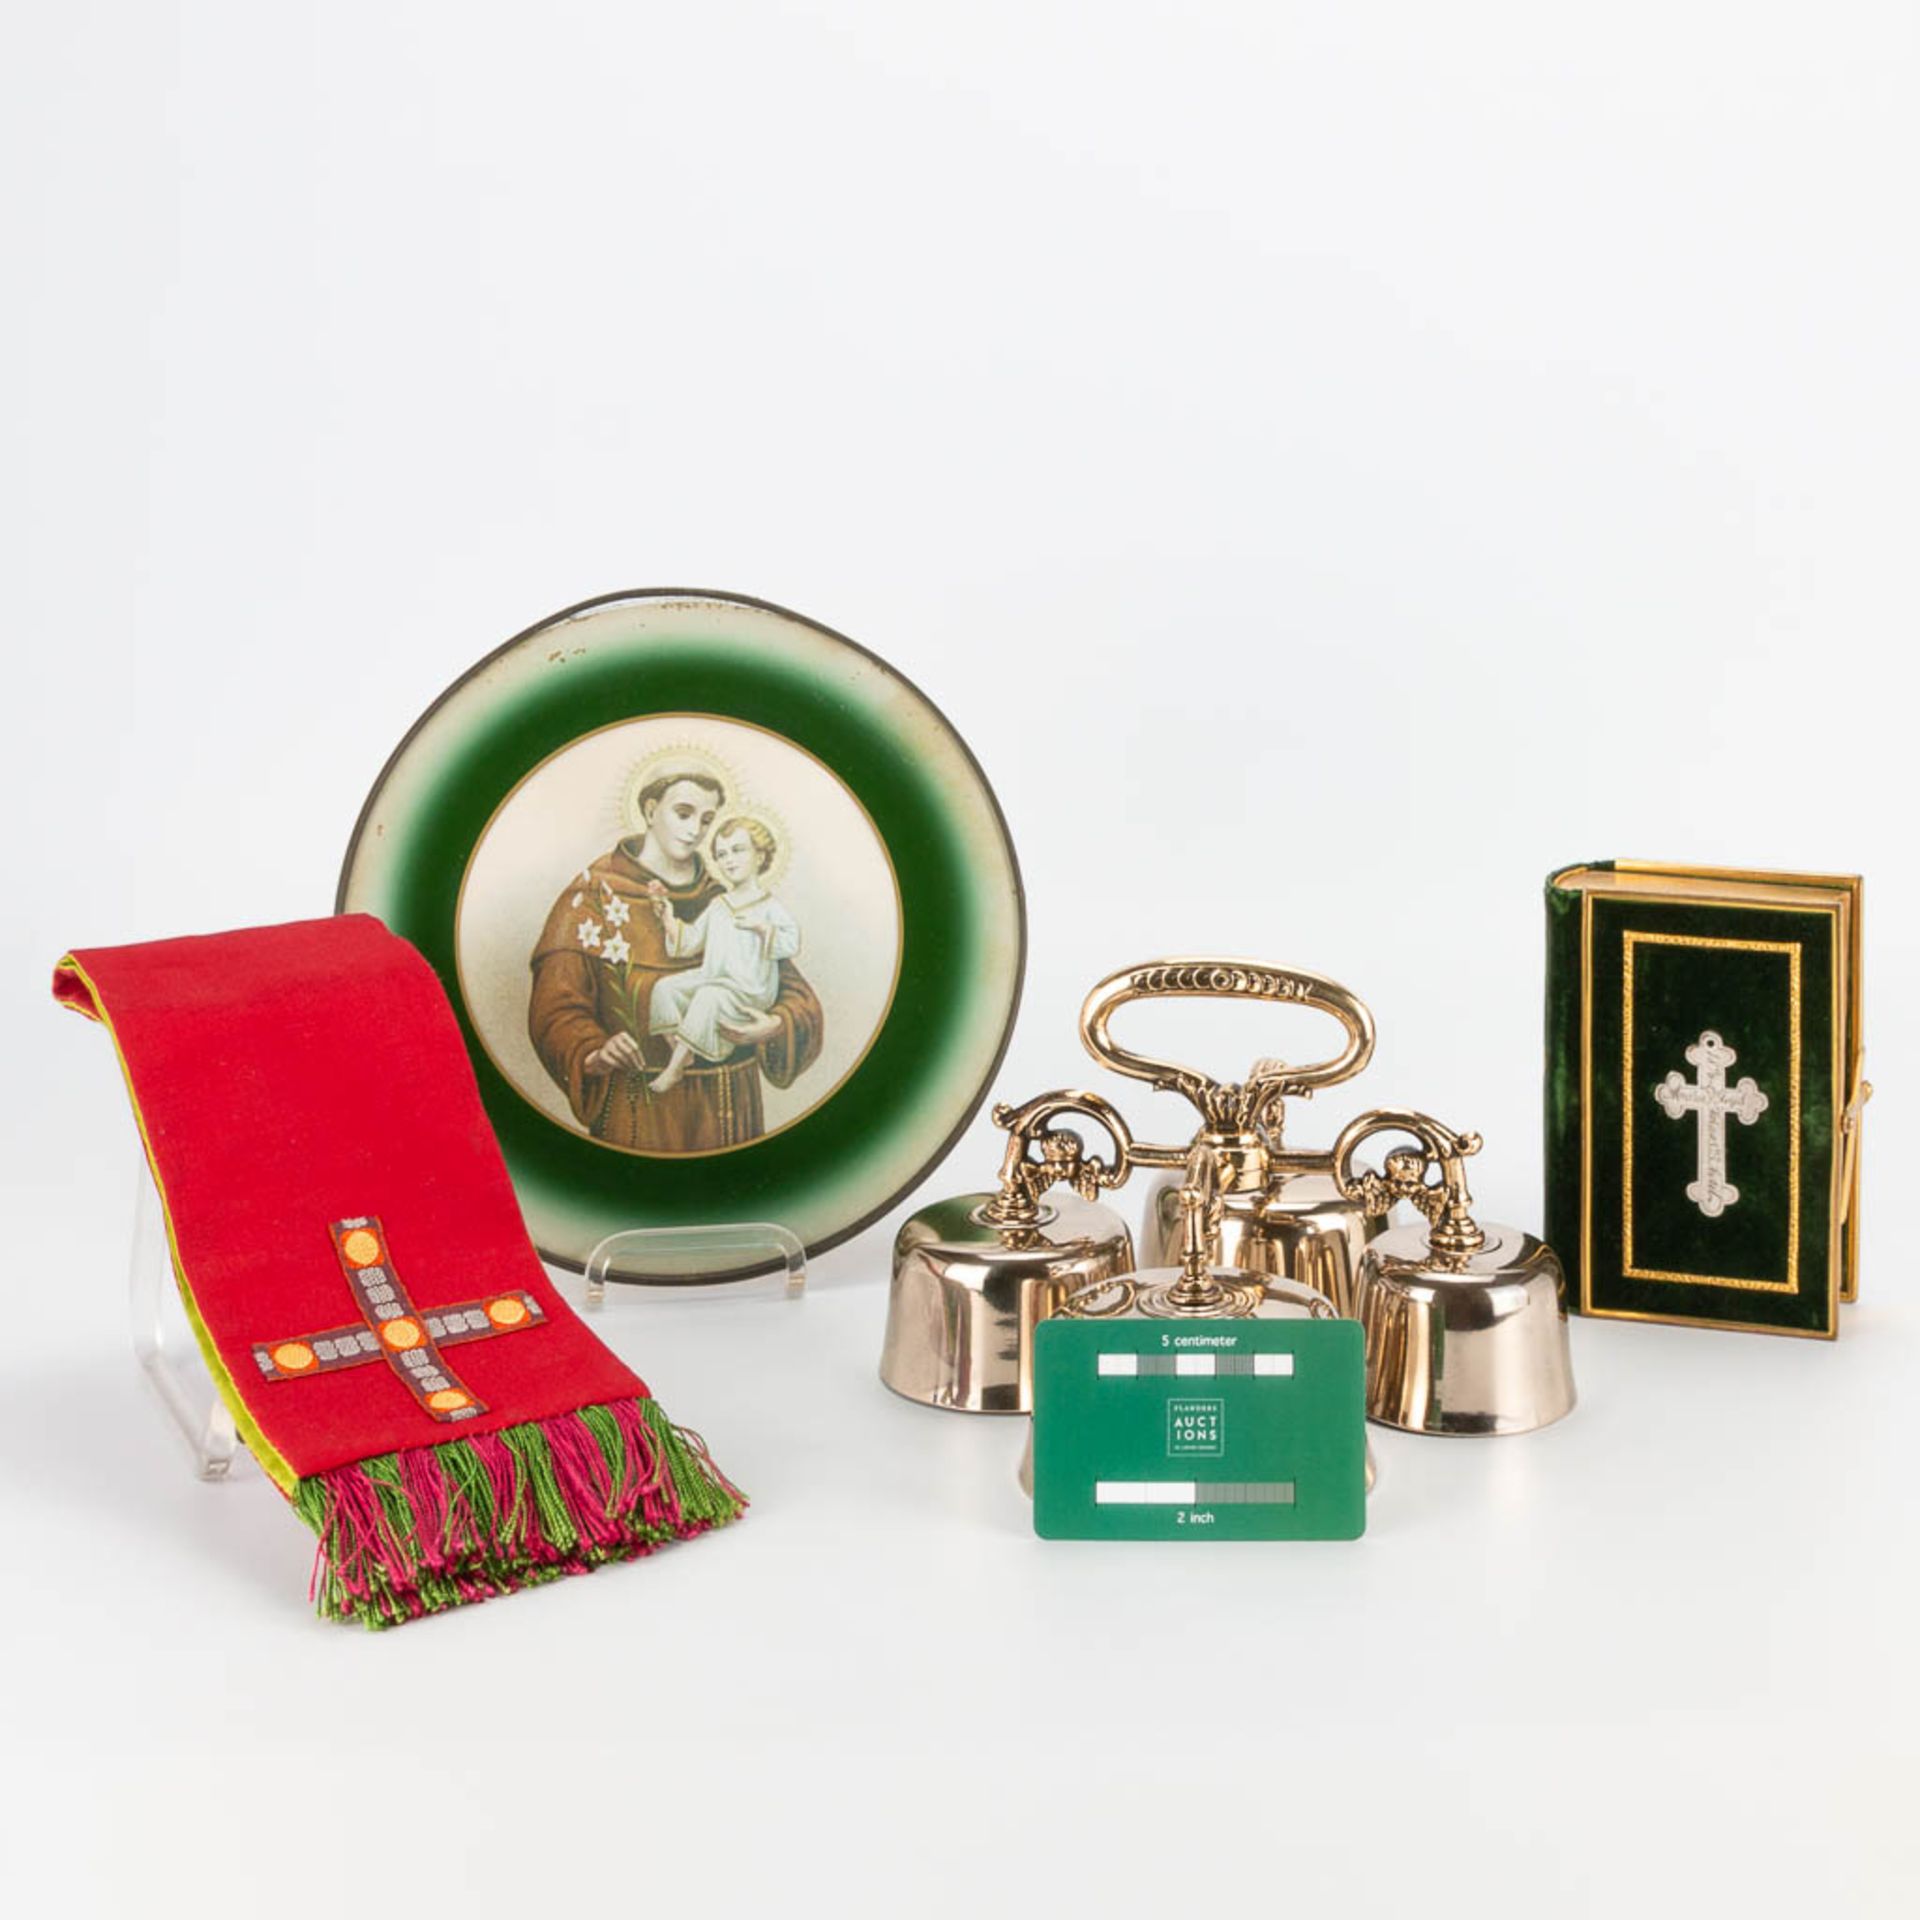 A collection of 4 Religious items, an altar bell, Paroissien and stola. (20 x 21 x 12 cm) - Image 3 of 14